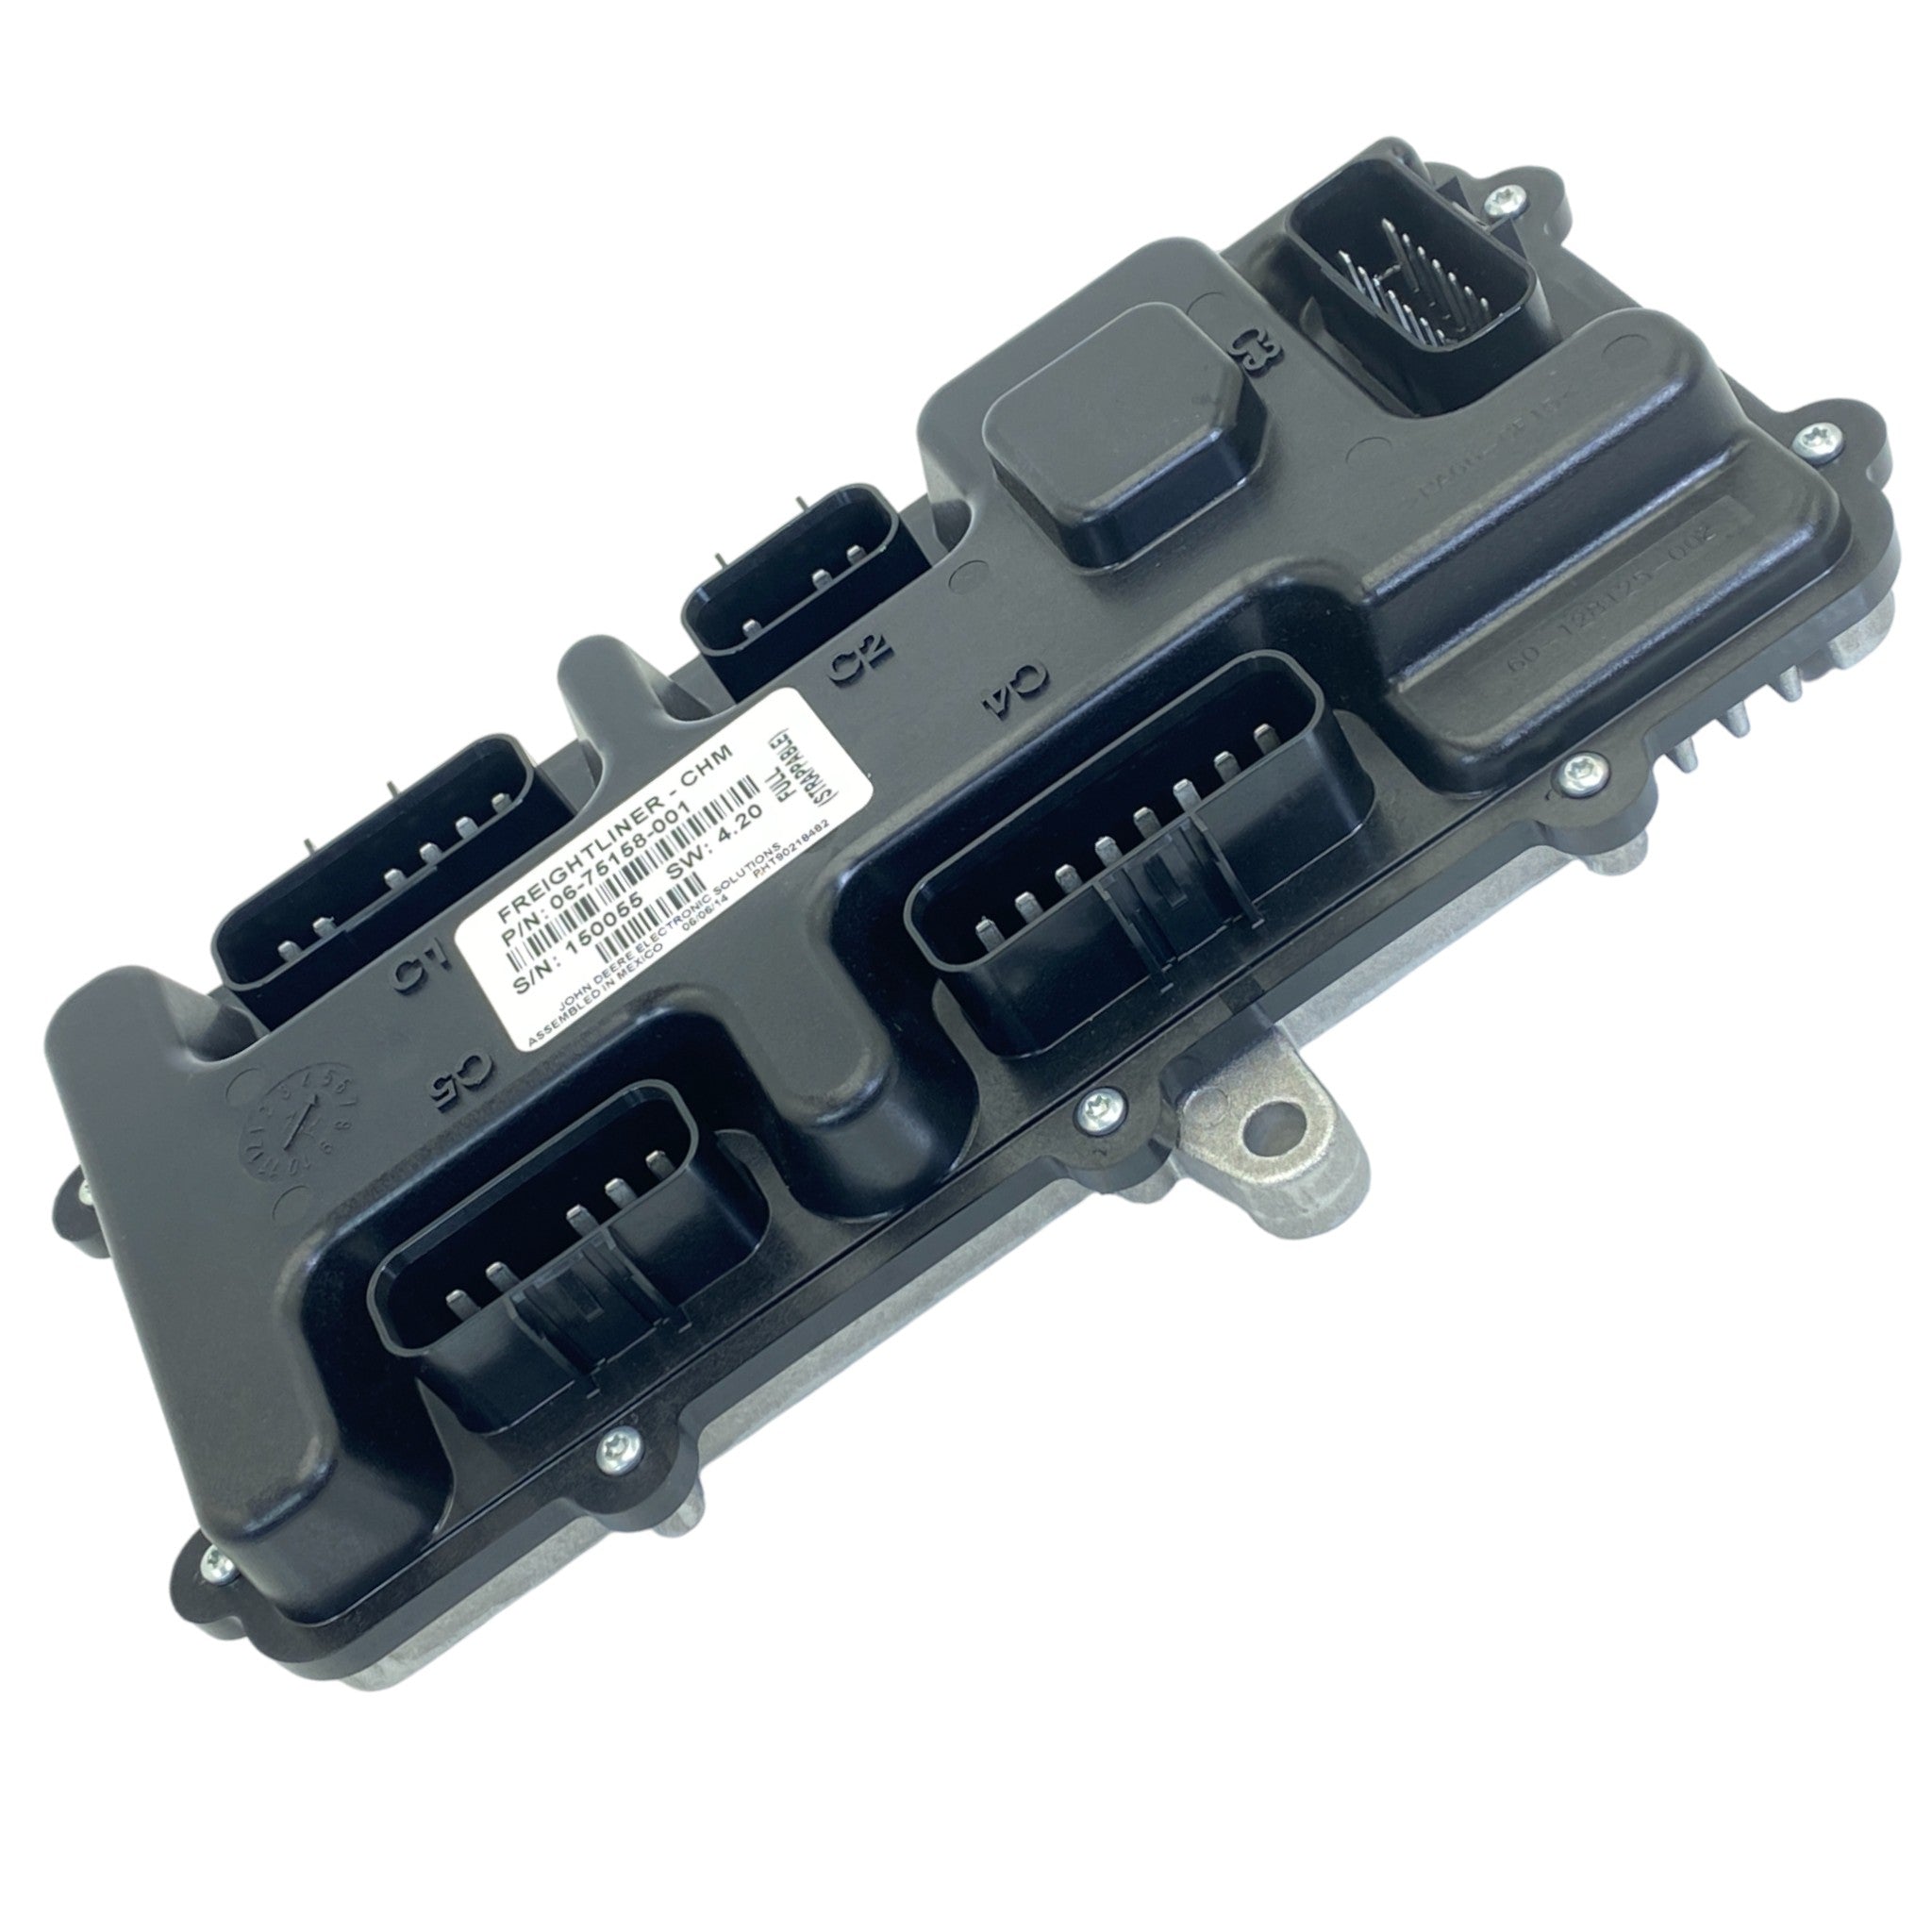 A66-19809-000 Genuine Freightliner Chm Bcm Module For M2 Business Class